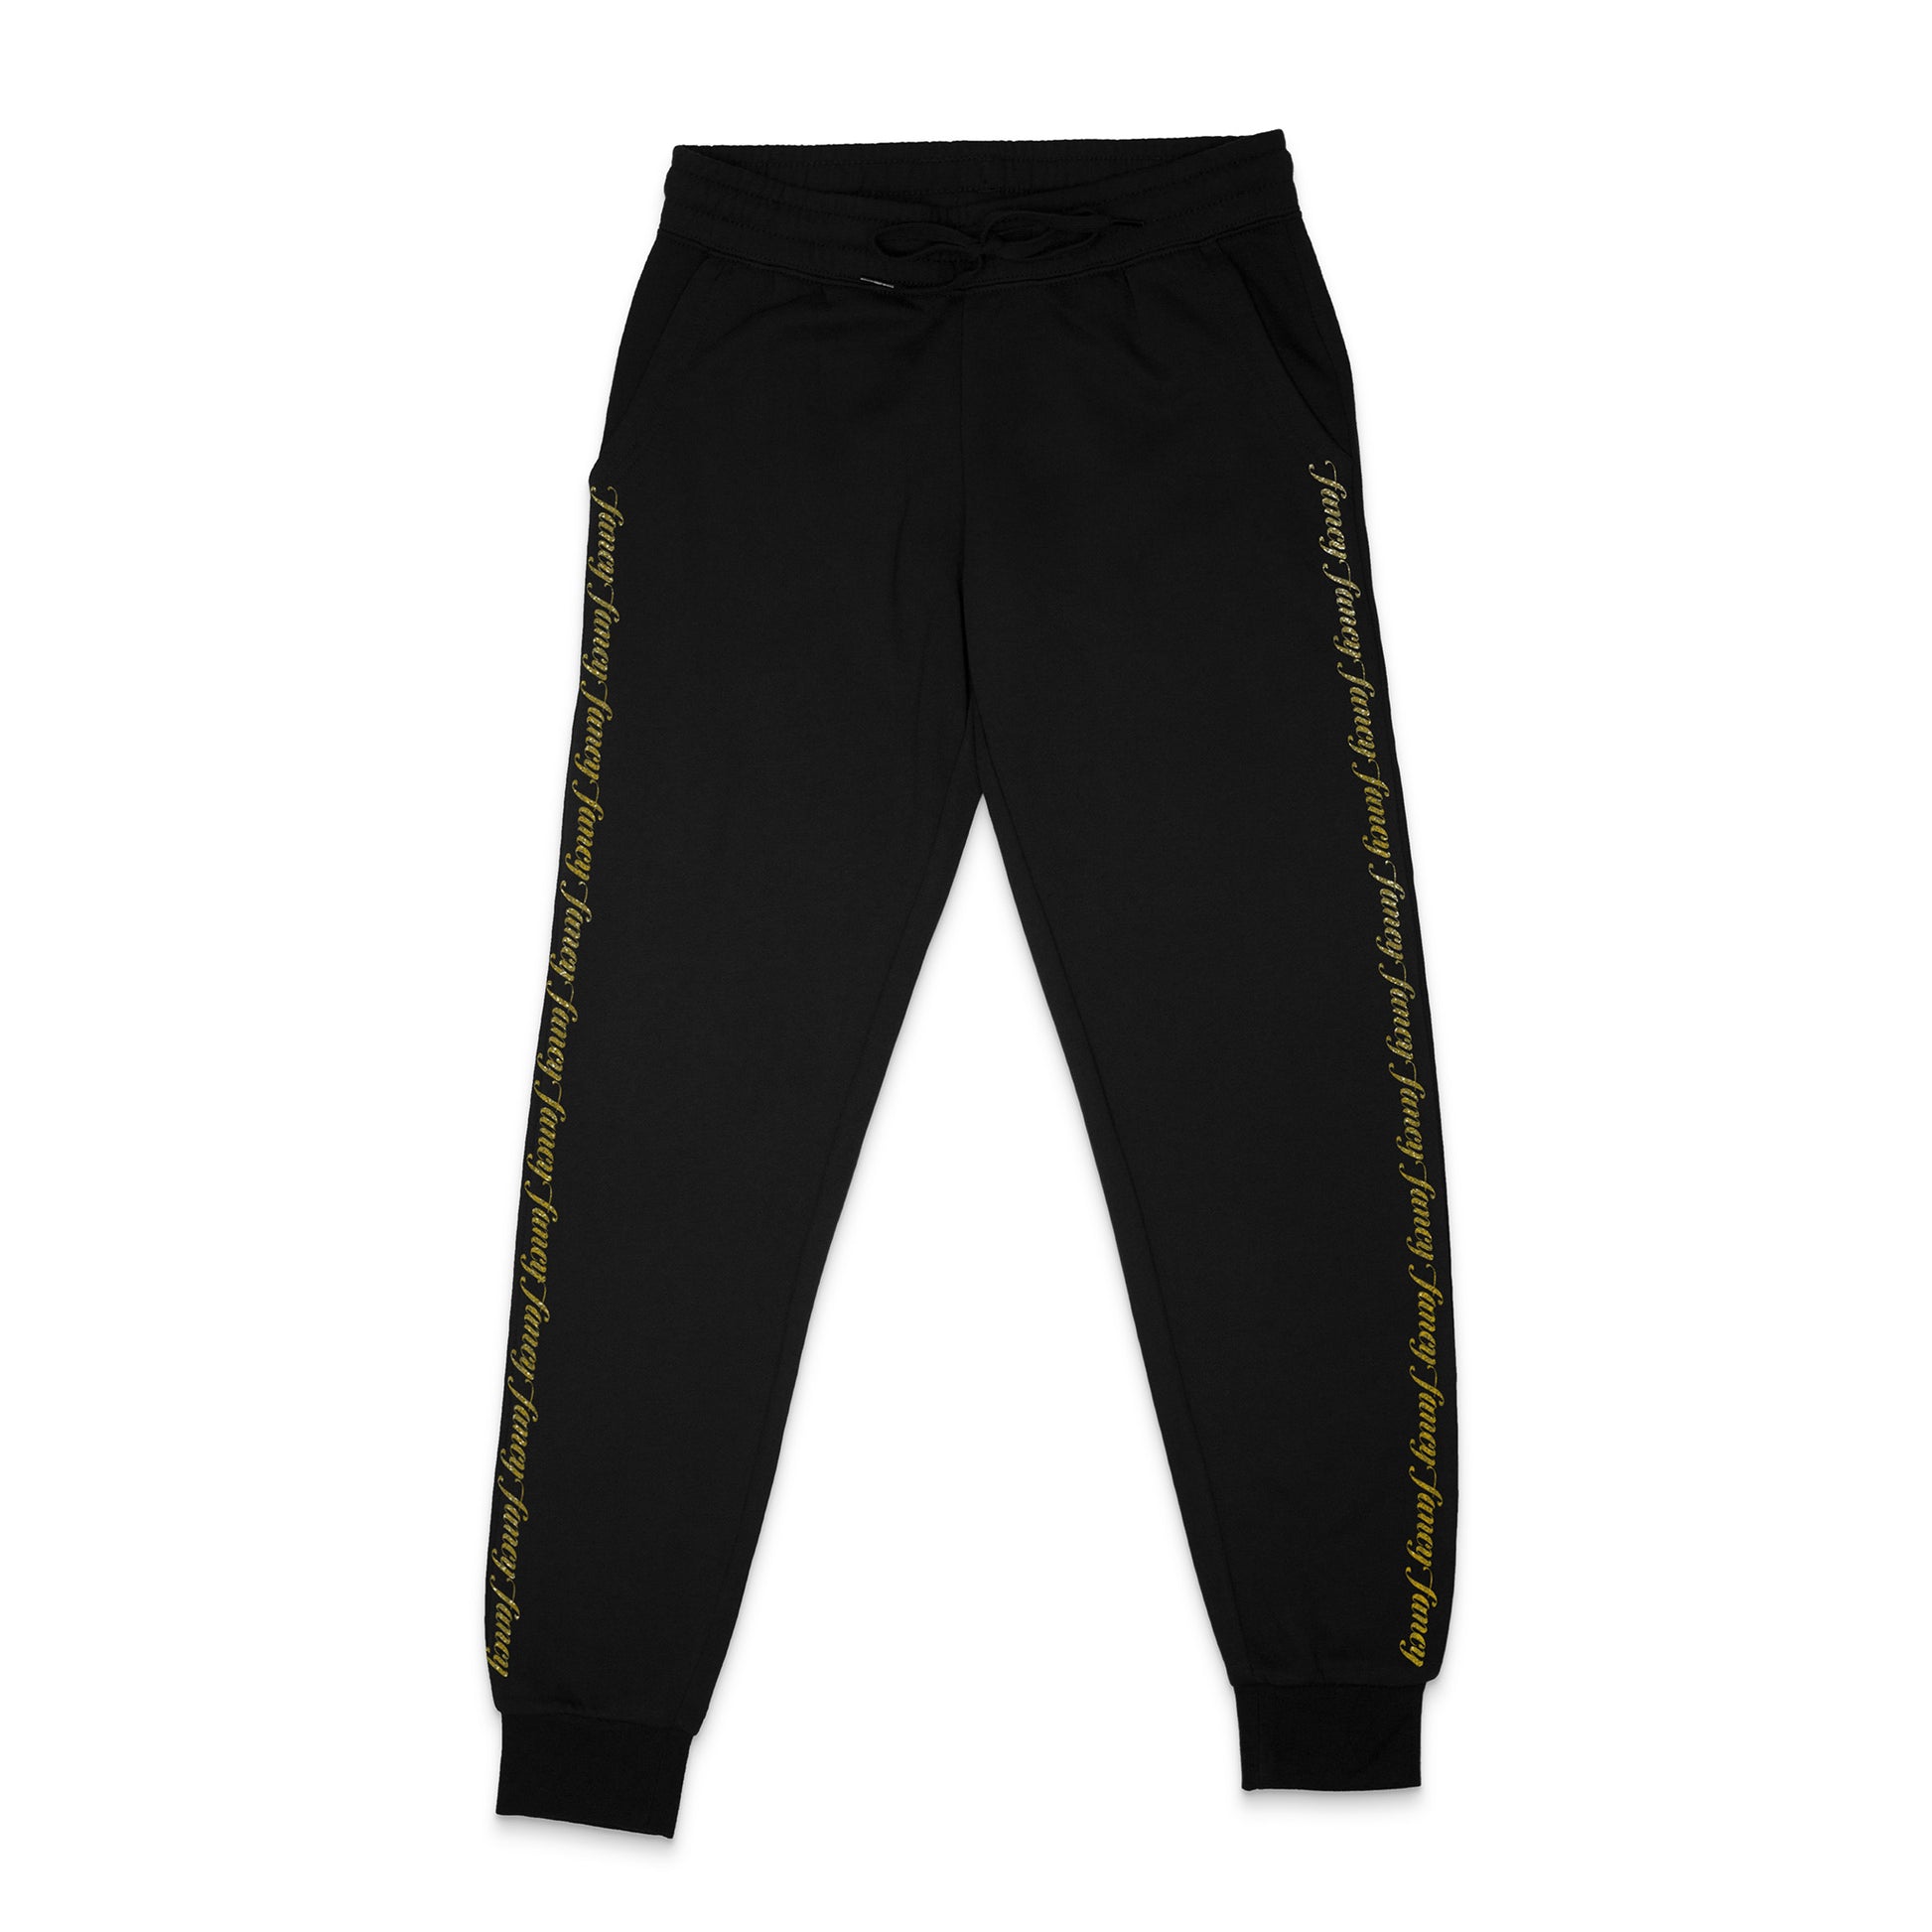 Fancy Pants - fancy text on leg sides, gold sparkle on black unisex, ethically-made sweatpants by BBJ / Glitter Garage